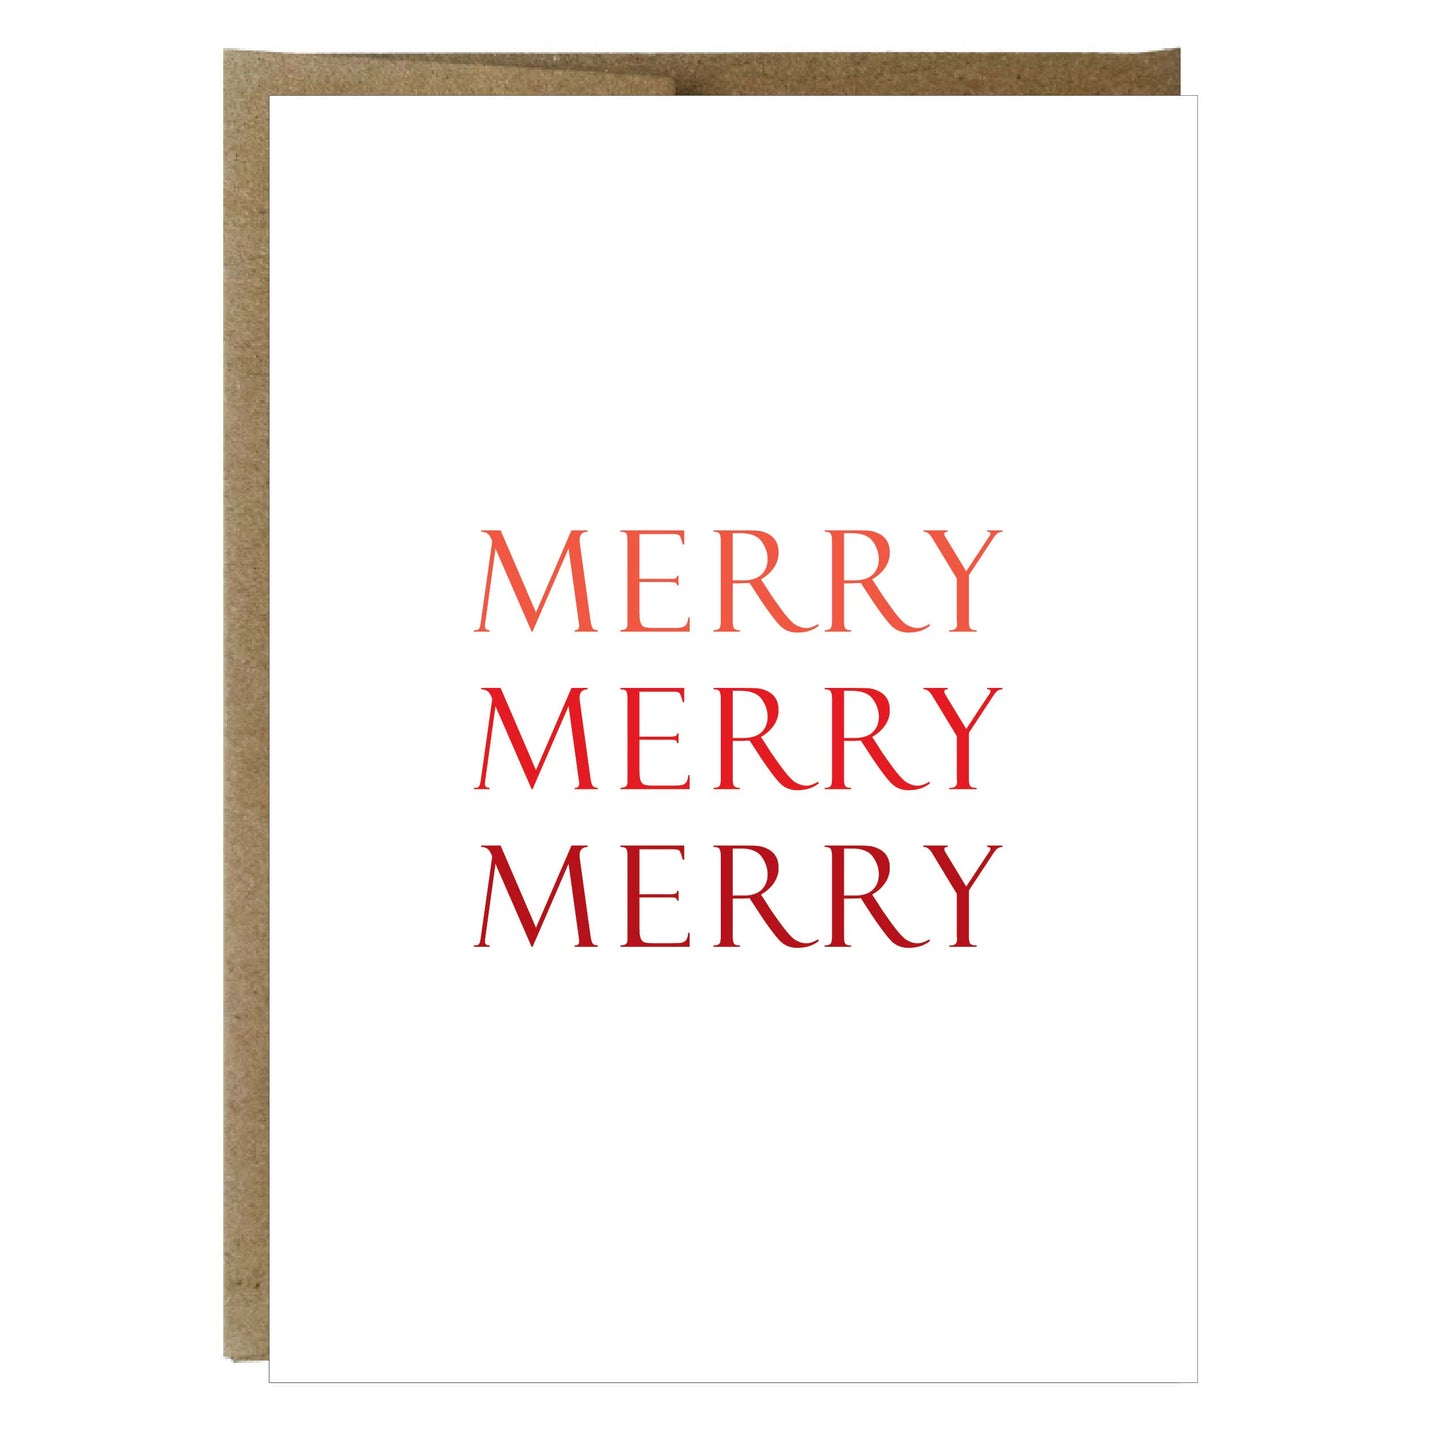 Merry Merry Merry Holiday Greeting Card